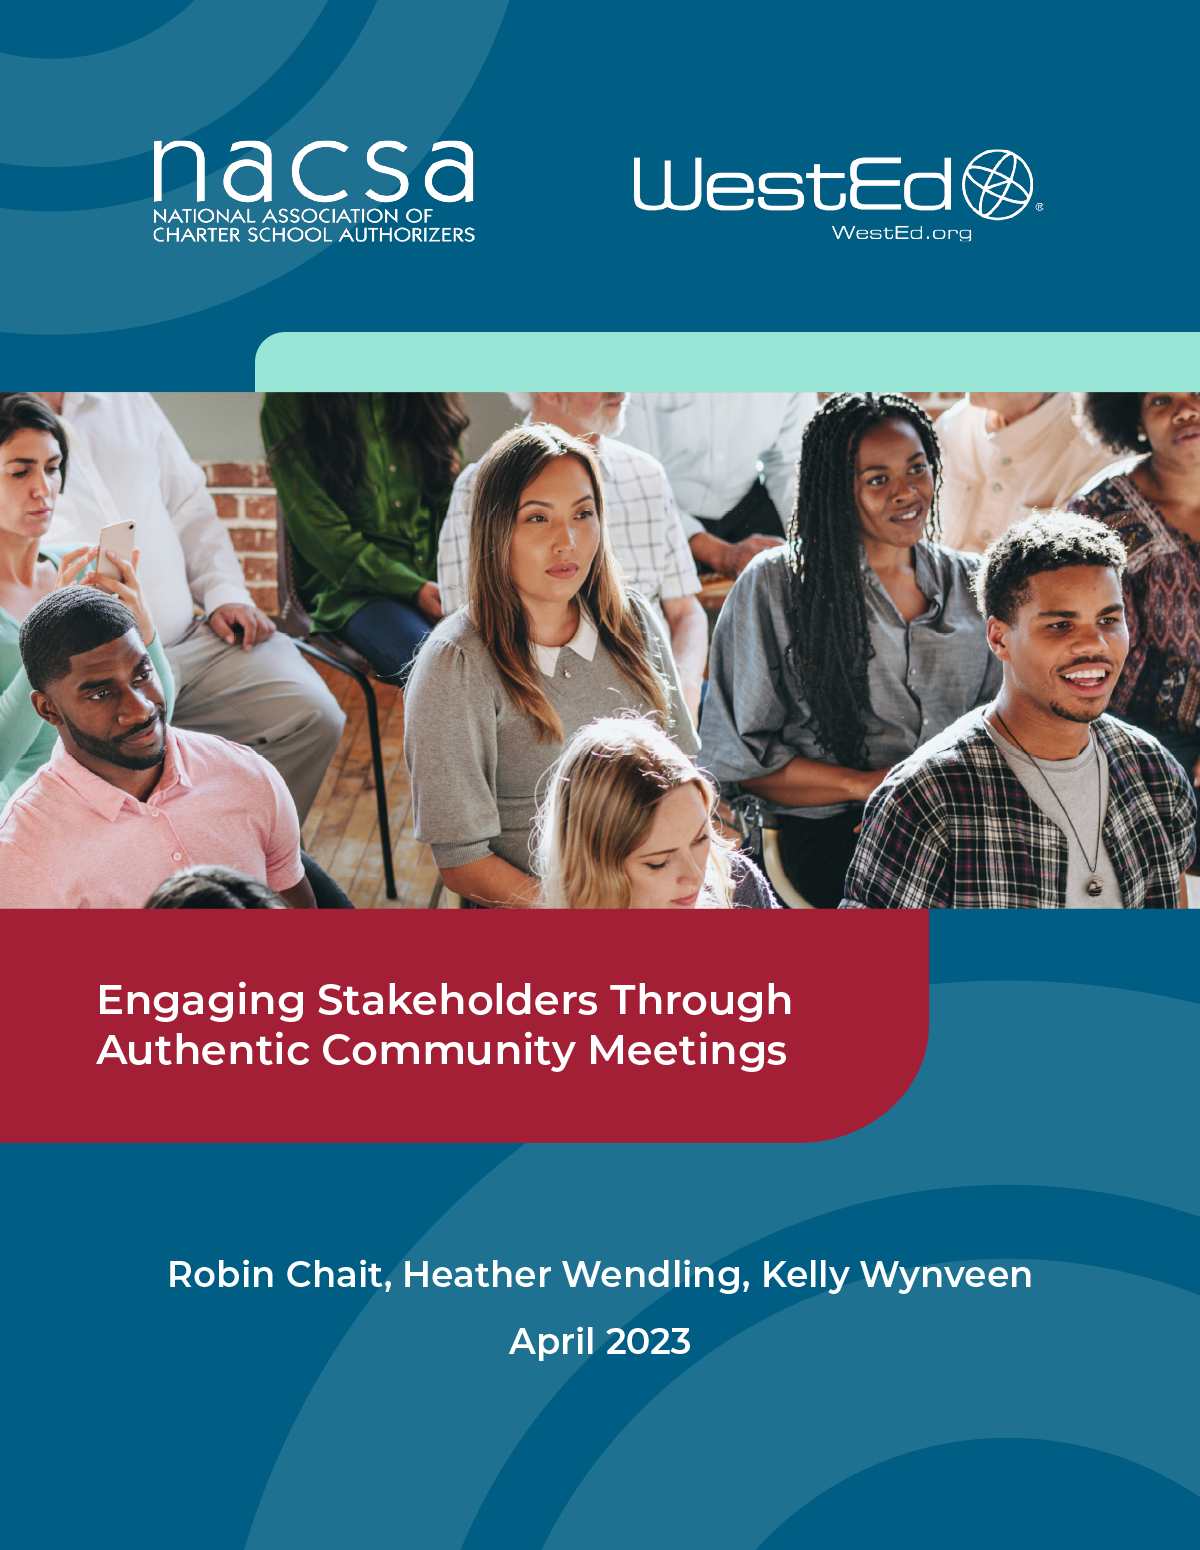 Engaging Stakeholders Through Authentic Community Meetings